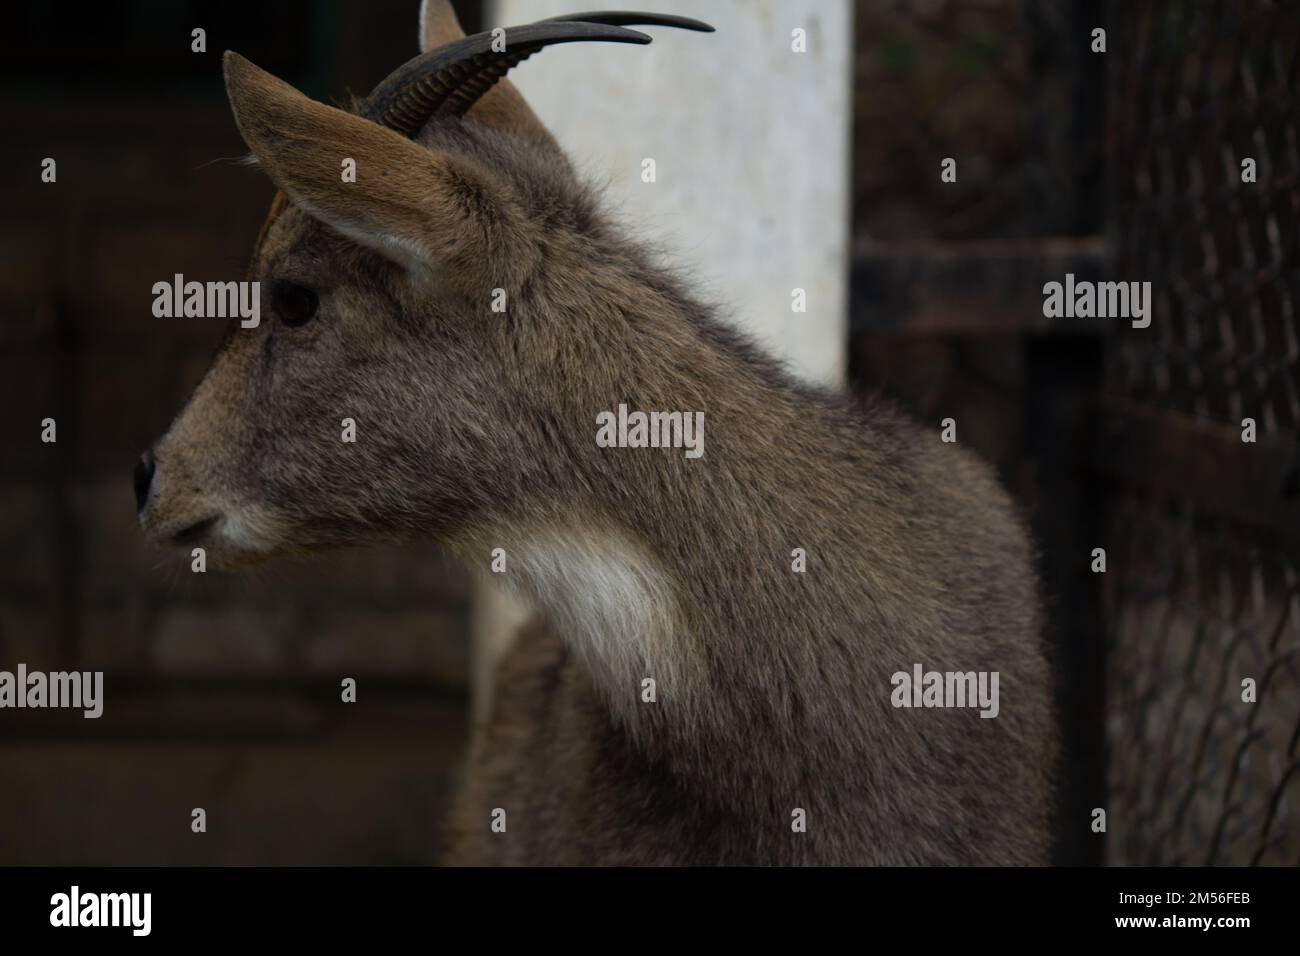 A closeup of a young  long-tailed goral (Naemorhedus caudatus) against blurred background Stock Photo